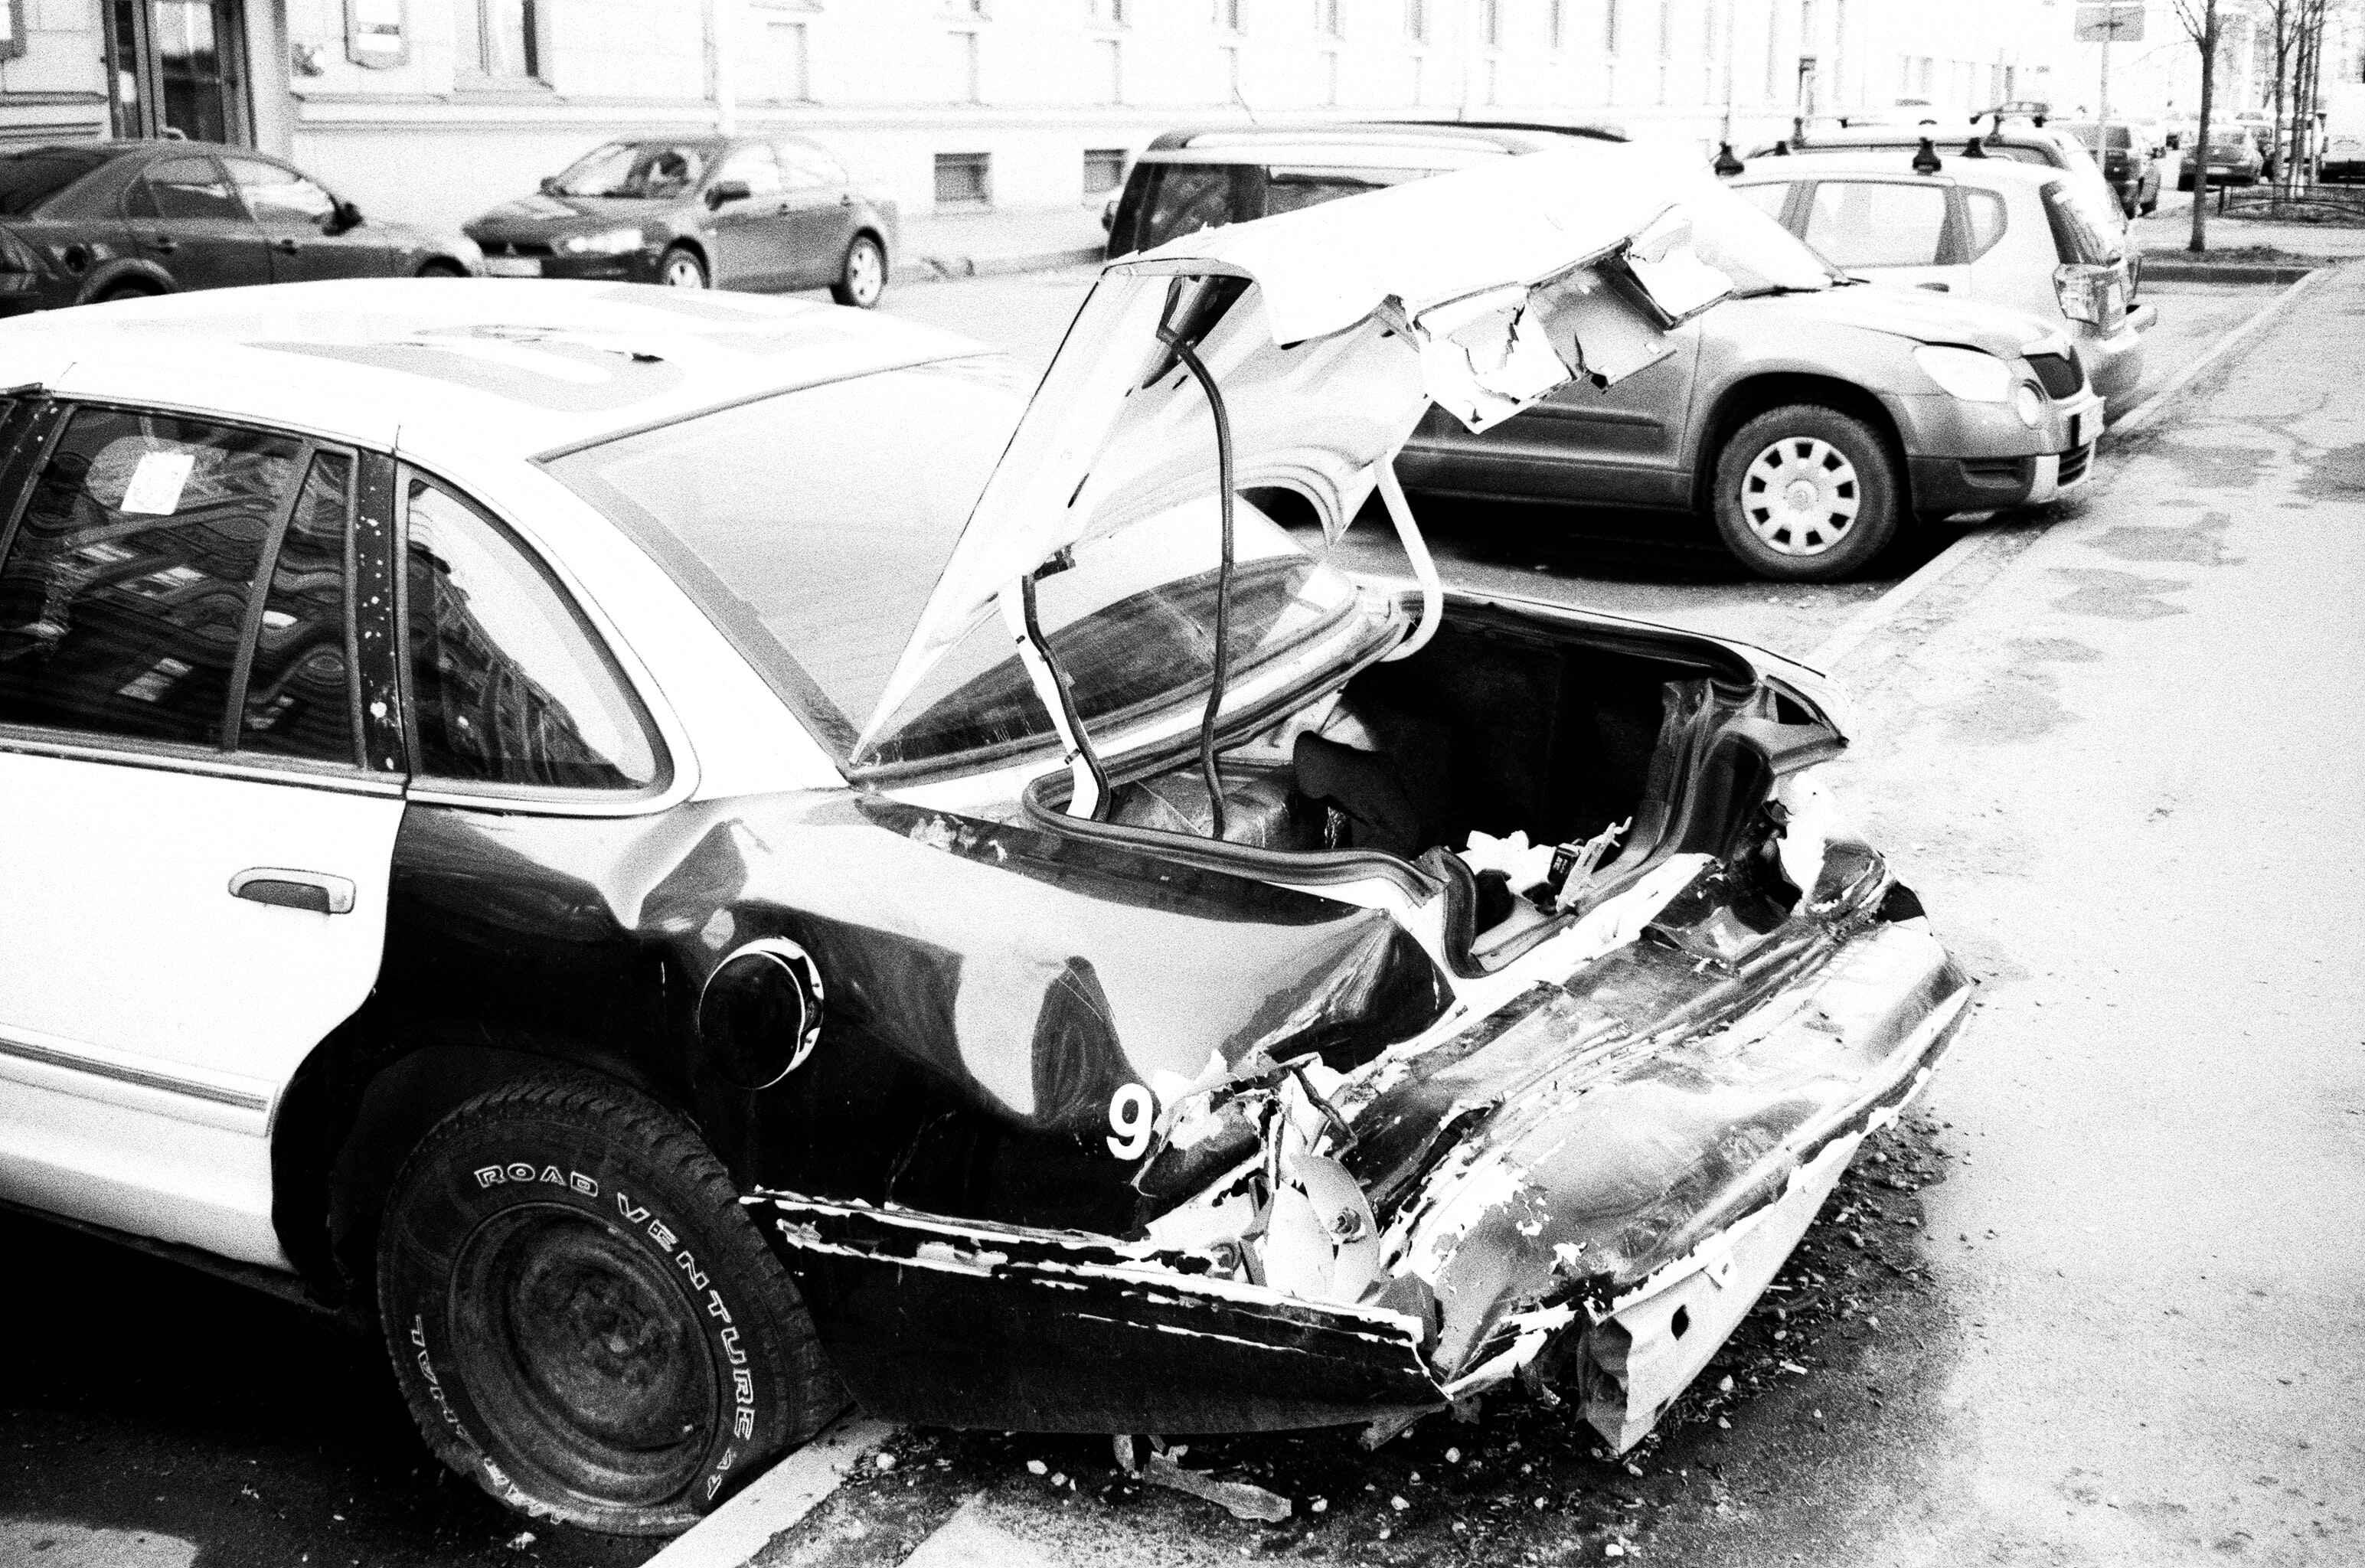 Featured: How to Handle a Hit and Run Accident - Smashed vehicle in parking lot